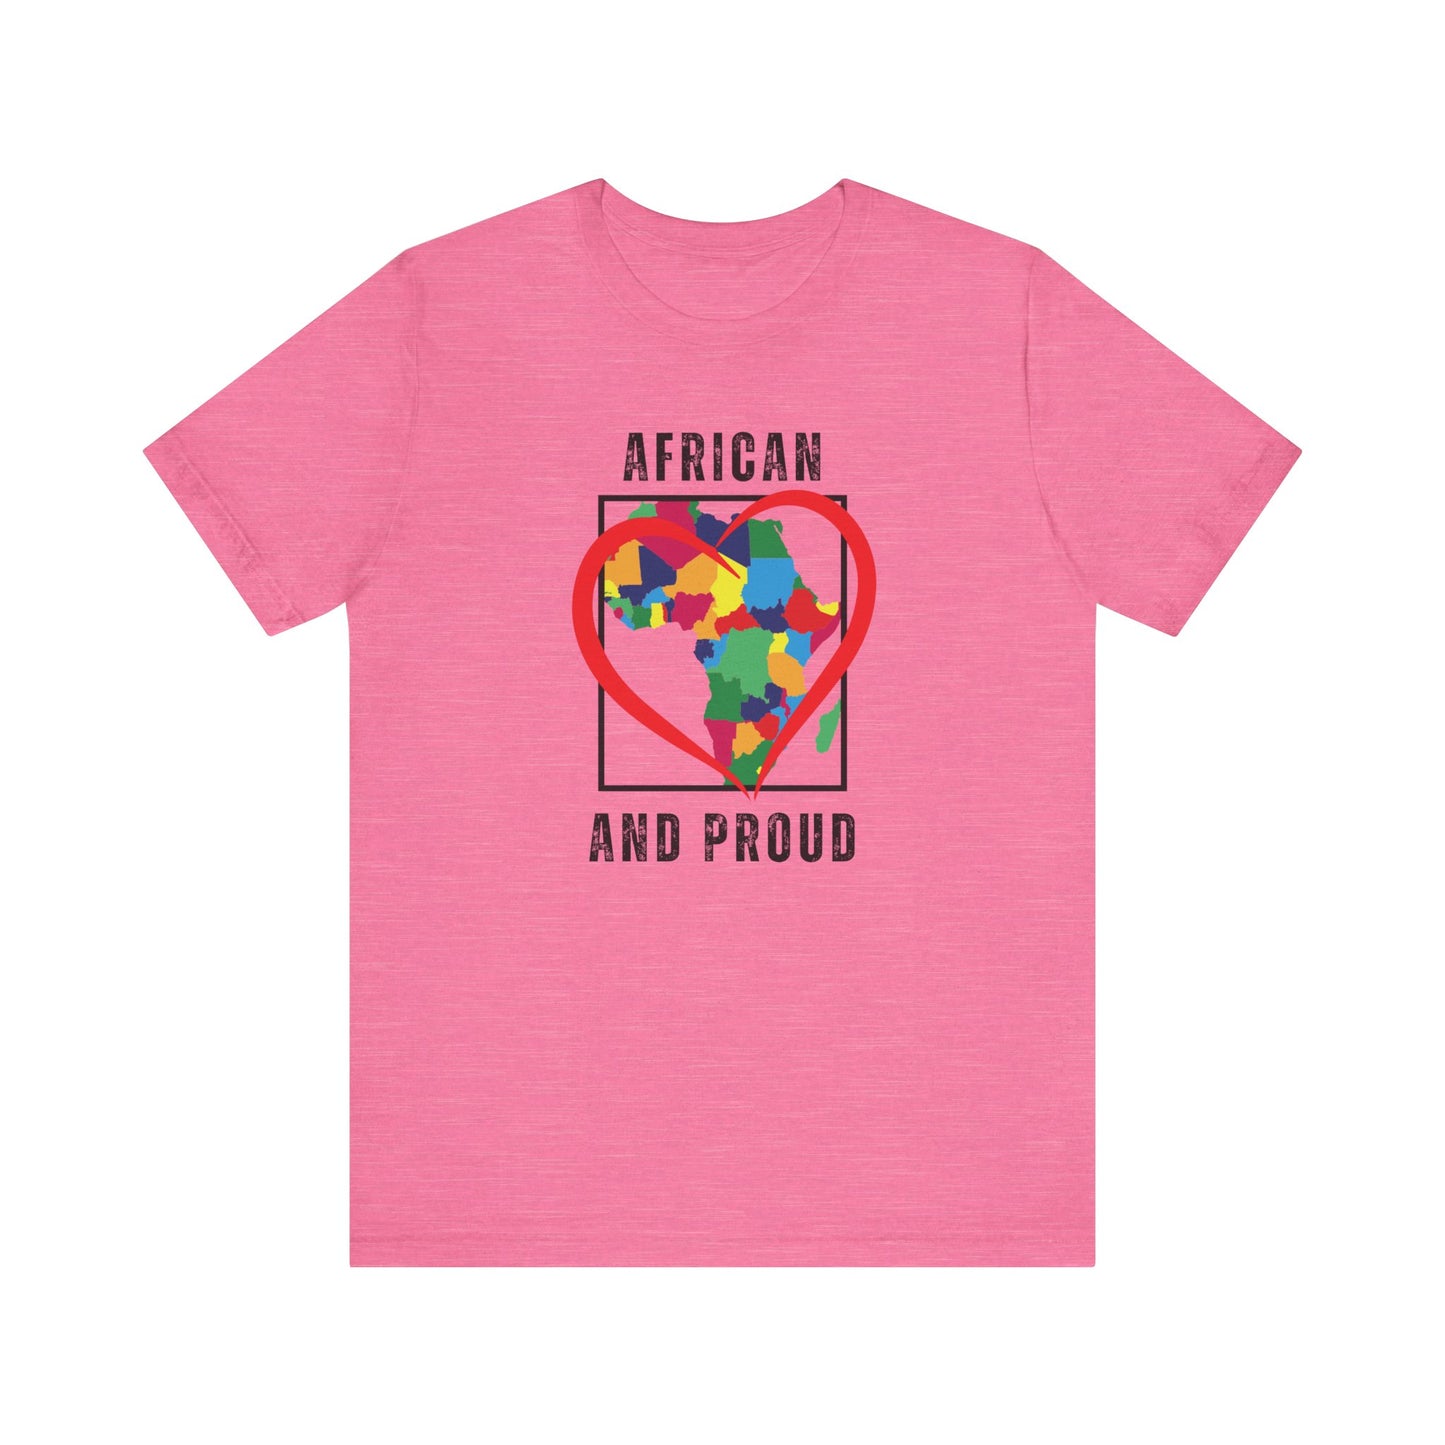 African and Proud shirt